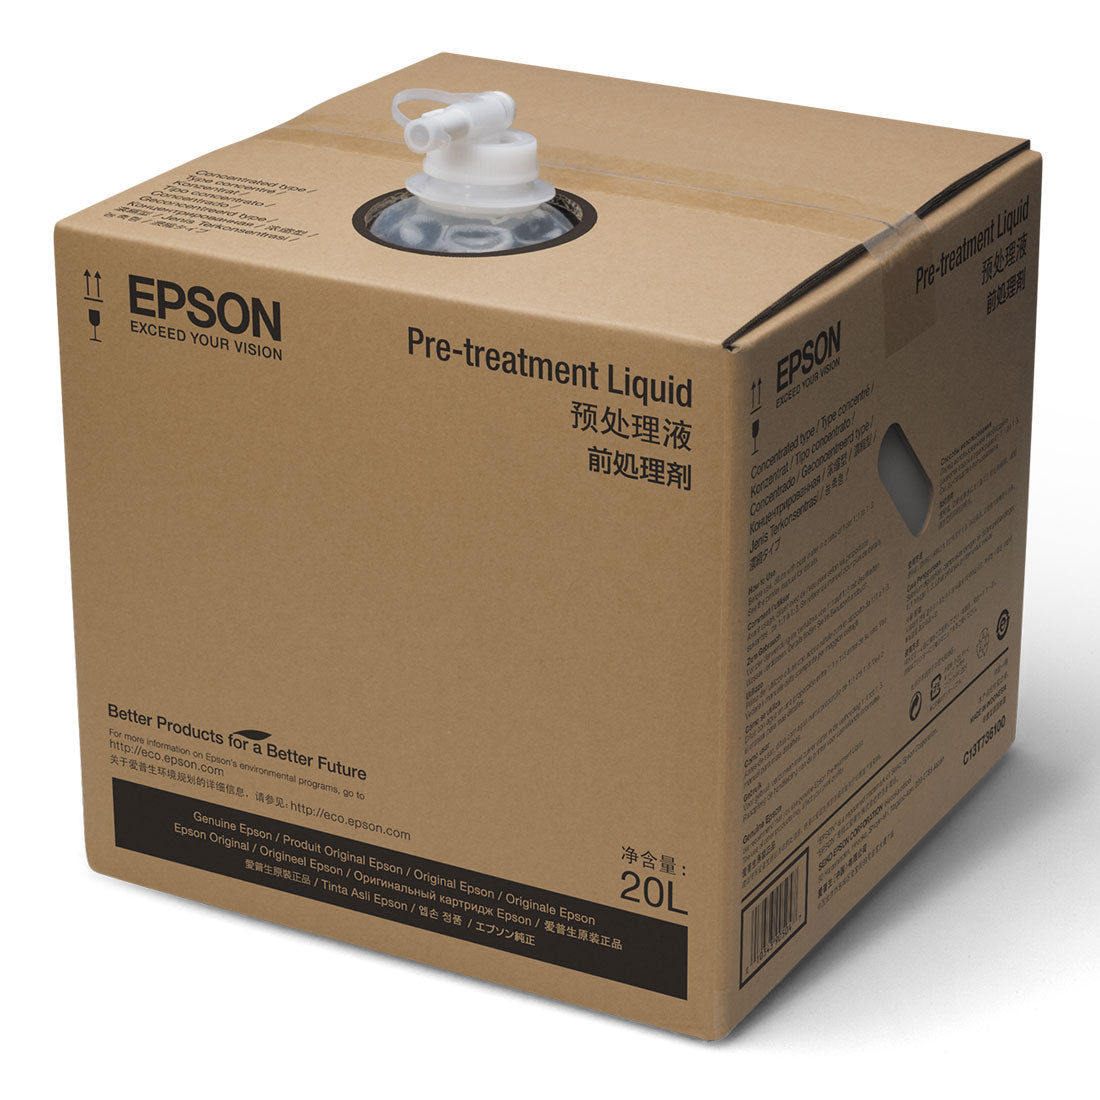 Epson® Pretreatment Fluid For Polyester - Joto Imaging Supplies Canada